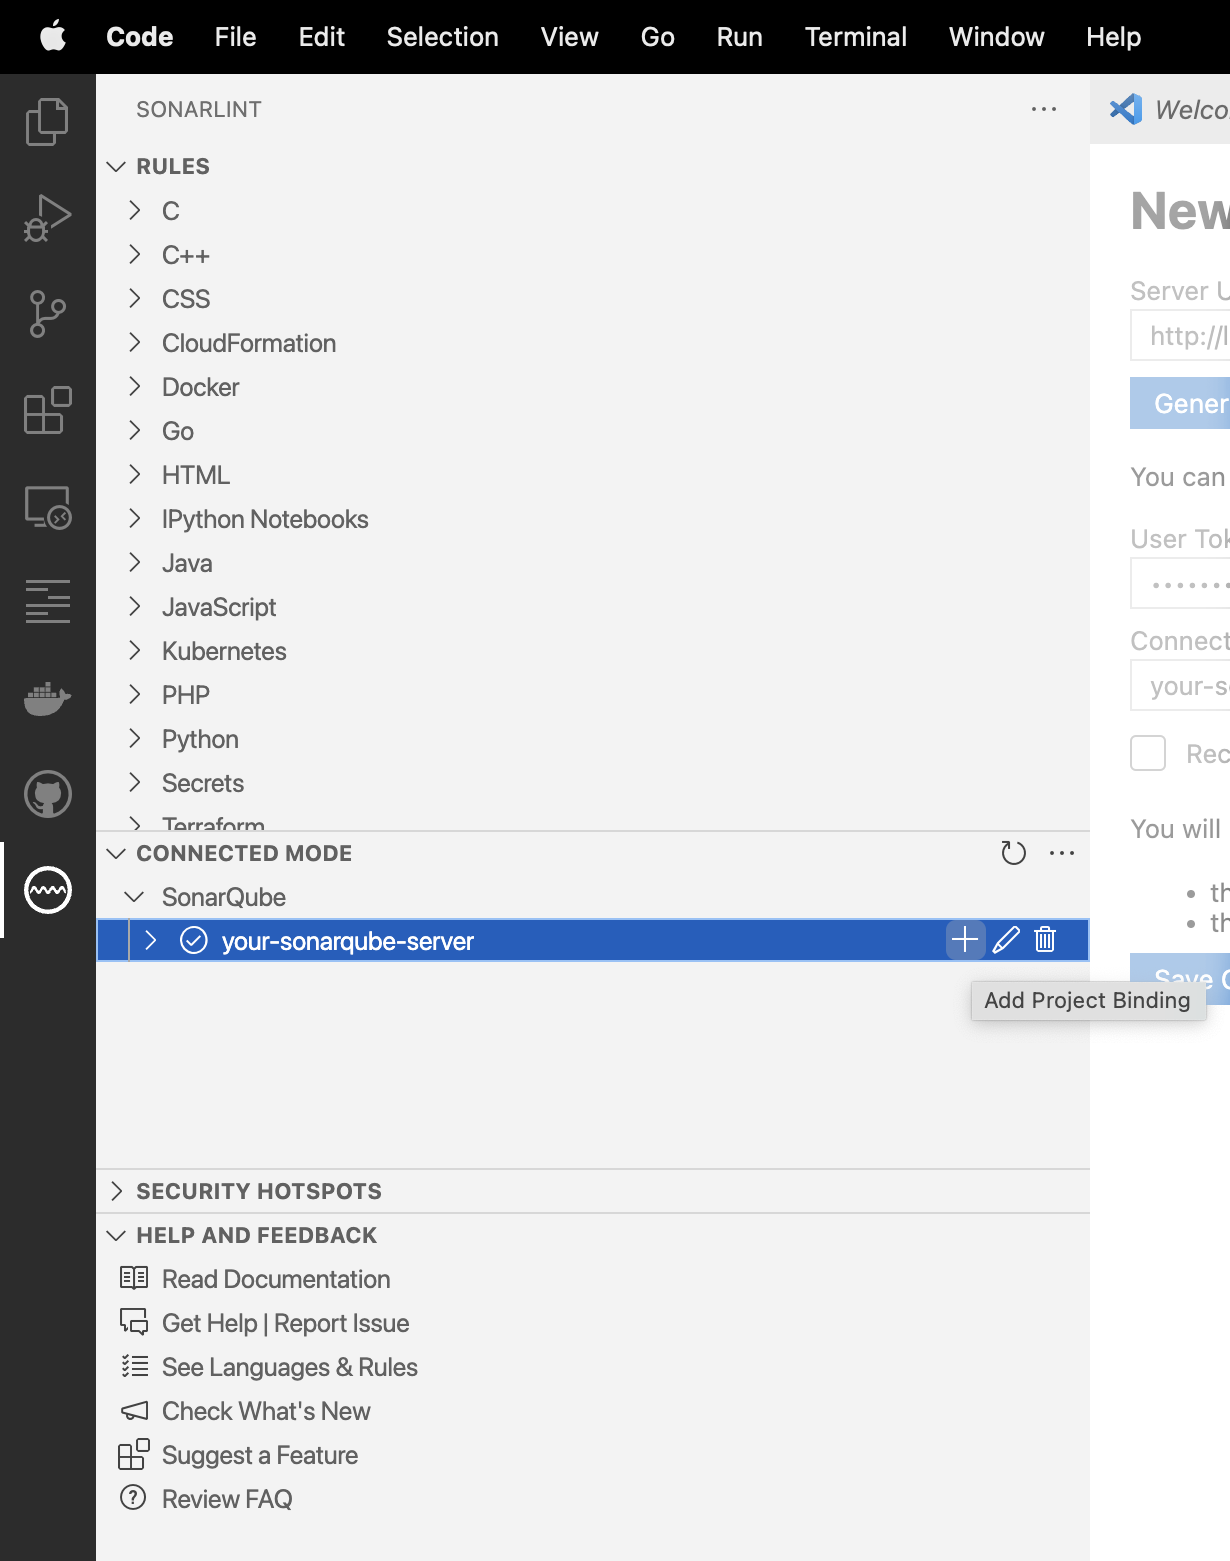 Select the ＋ icon to add a new SonarQube or SonarCloud project binding.